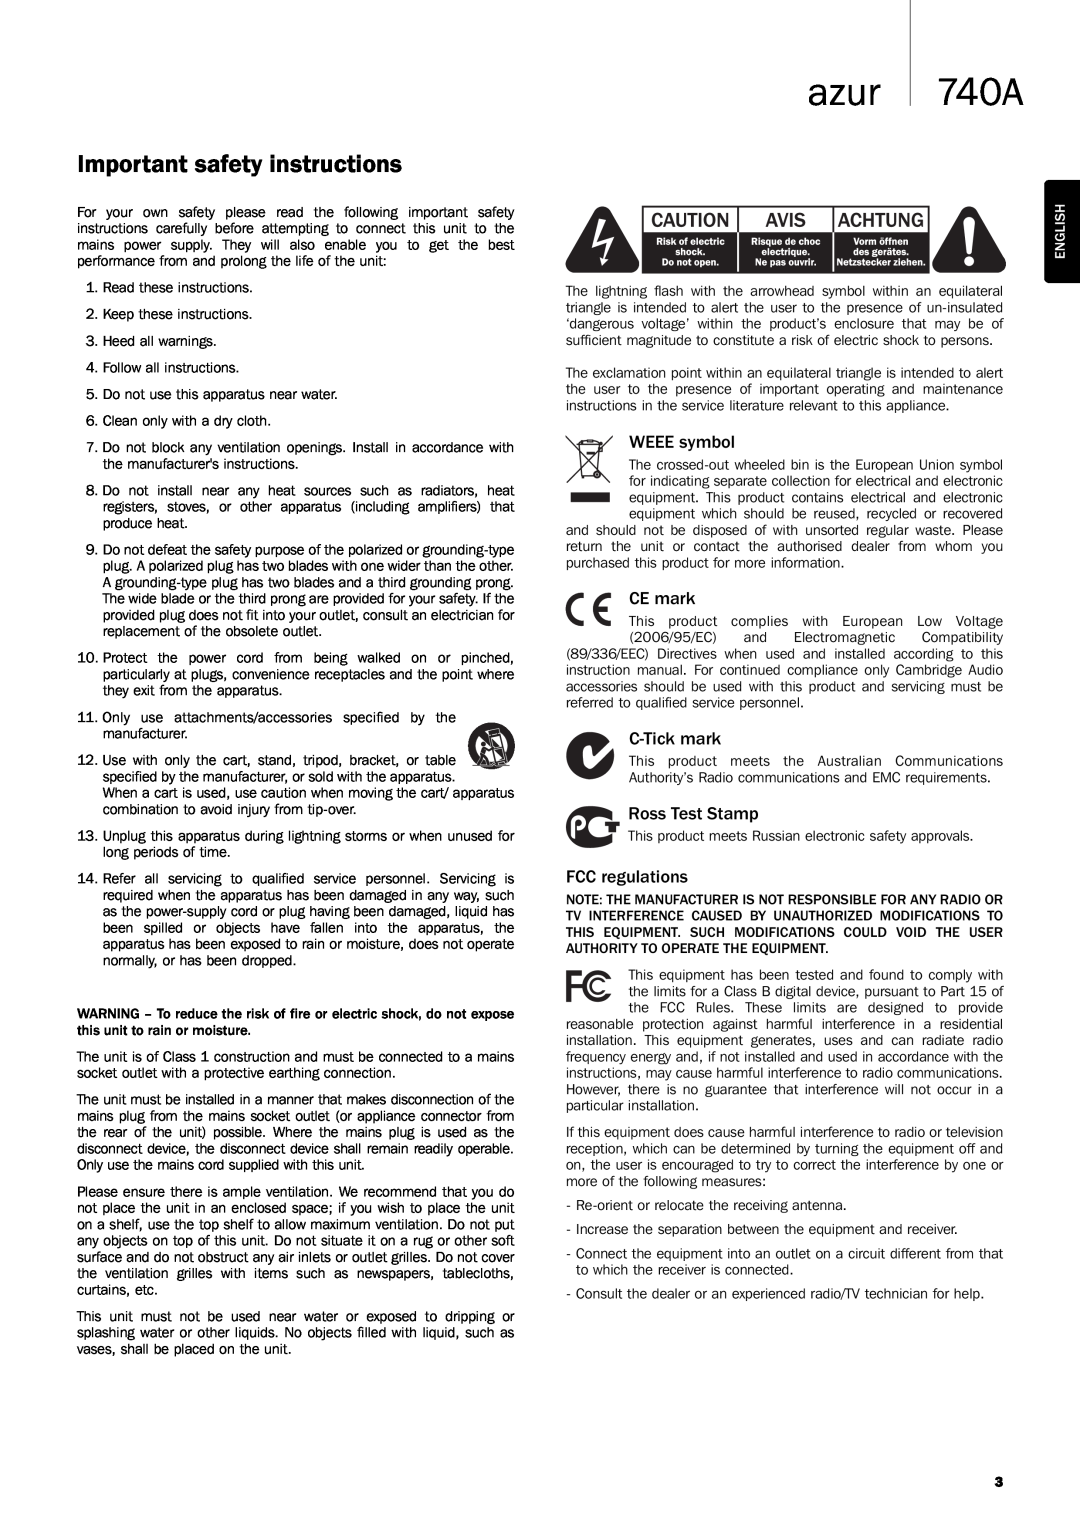 Cambridge Audio Azur 740A user manual azur 740A, Important safety instructions, English 